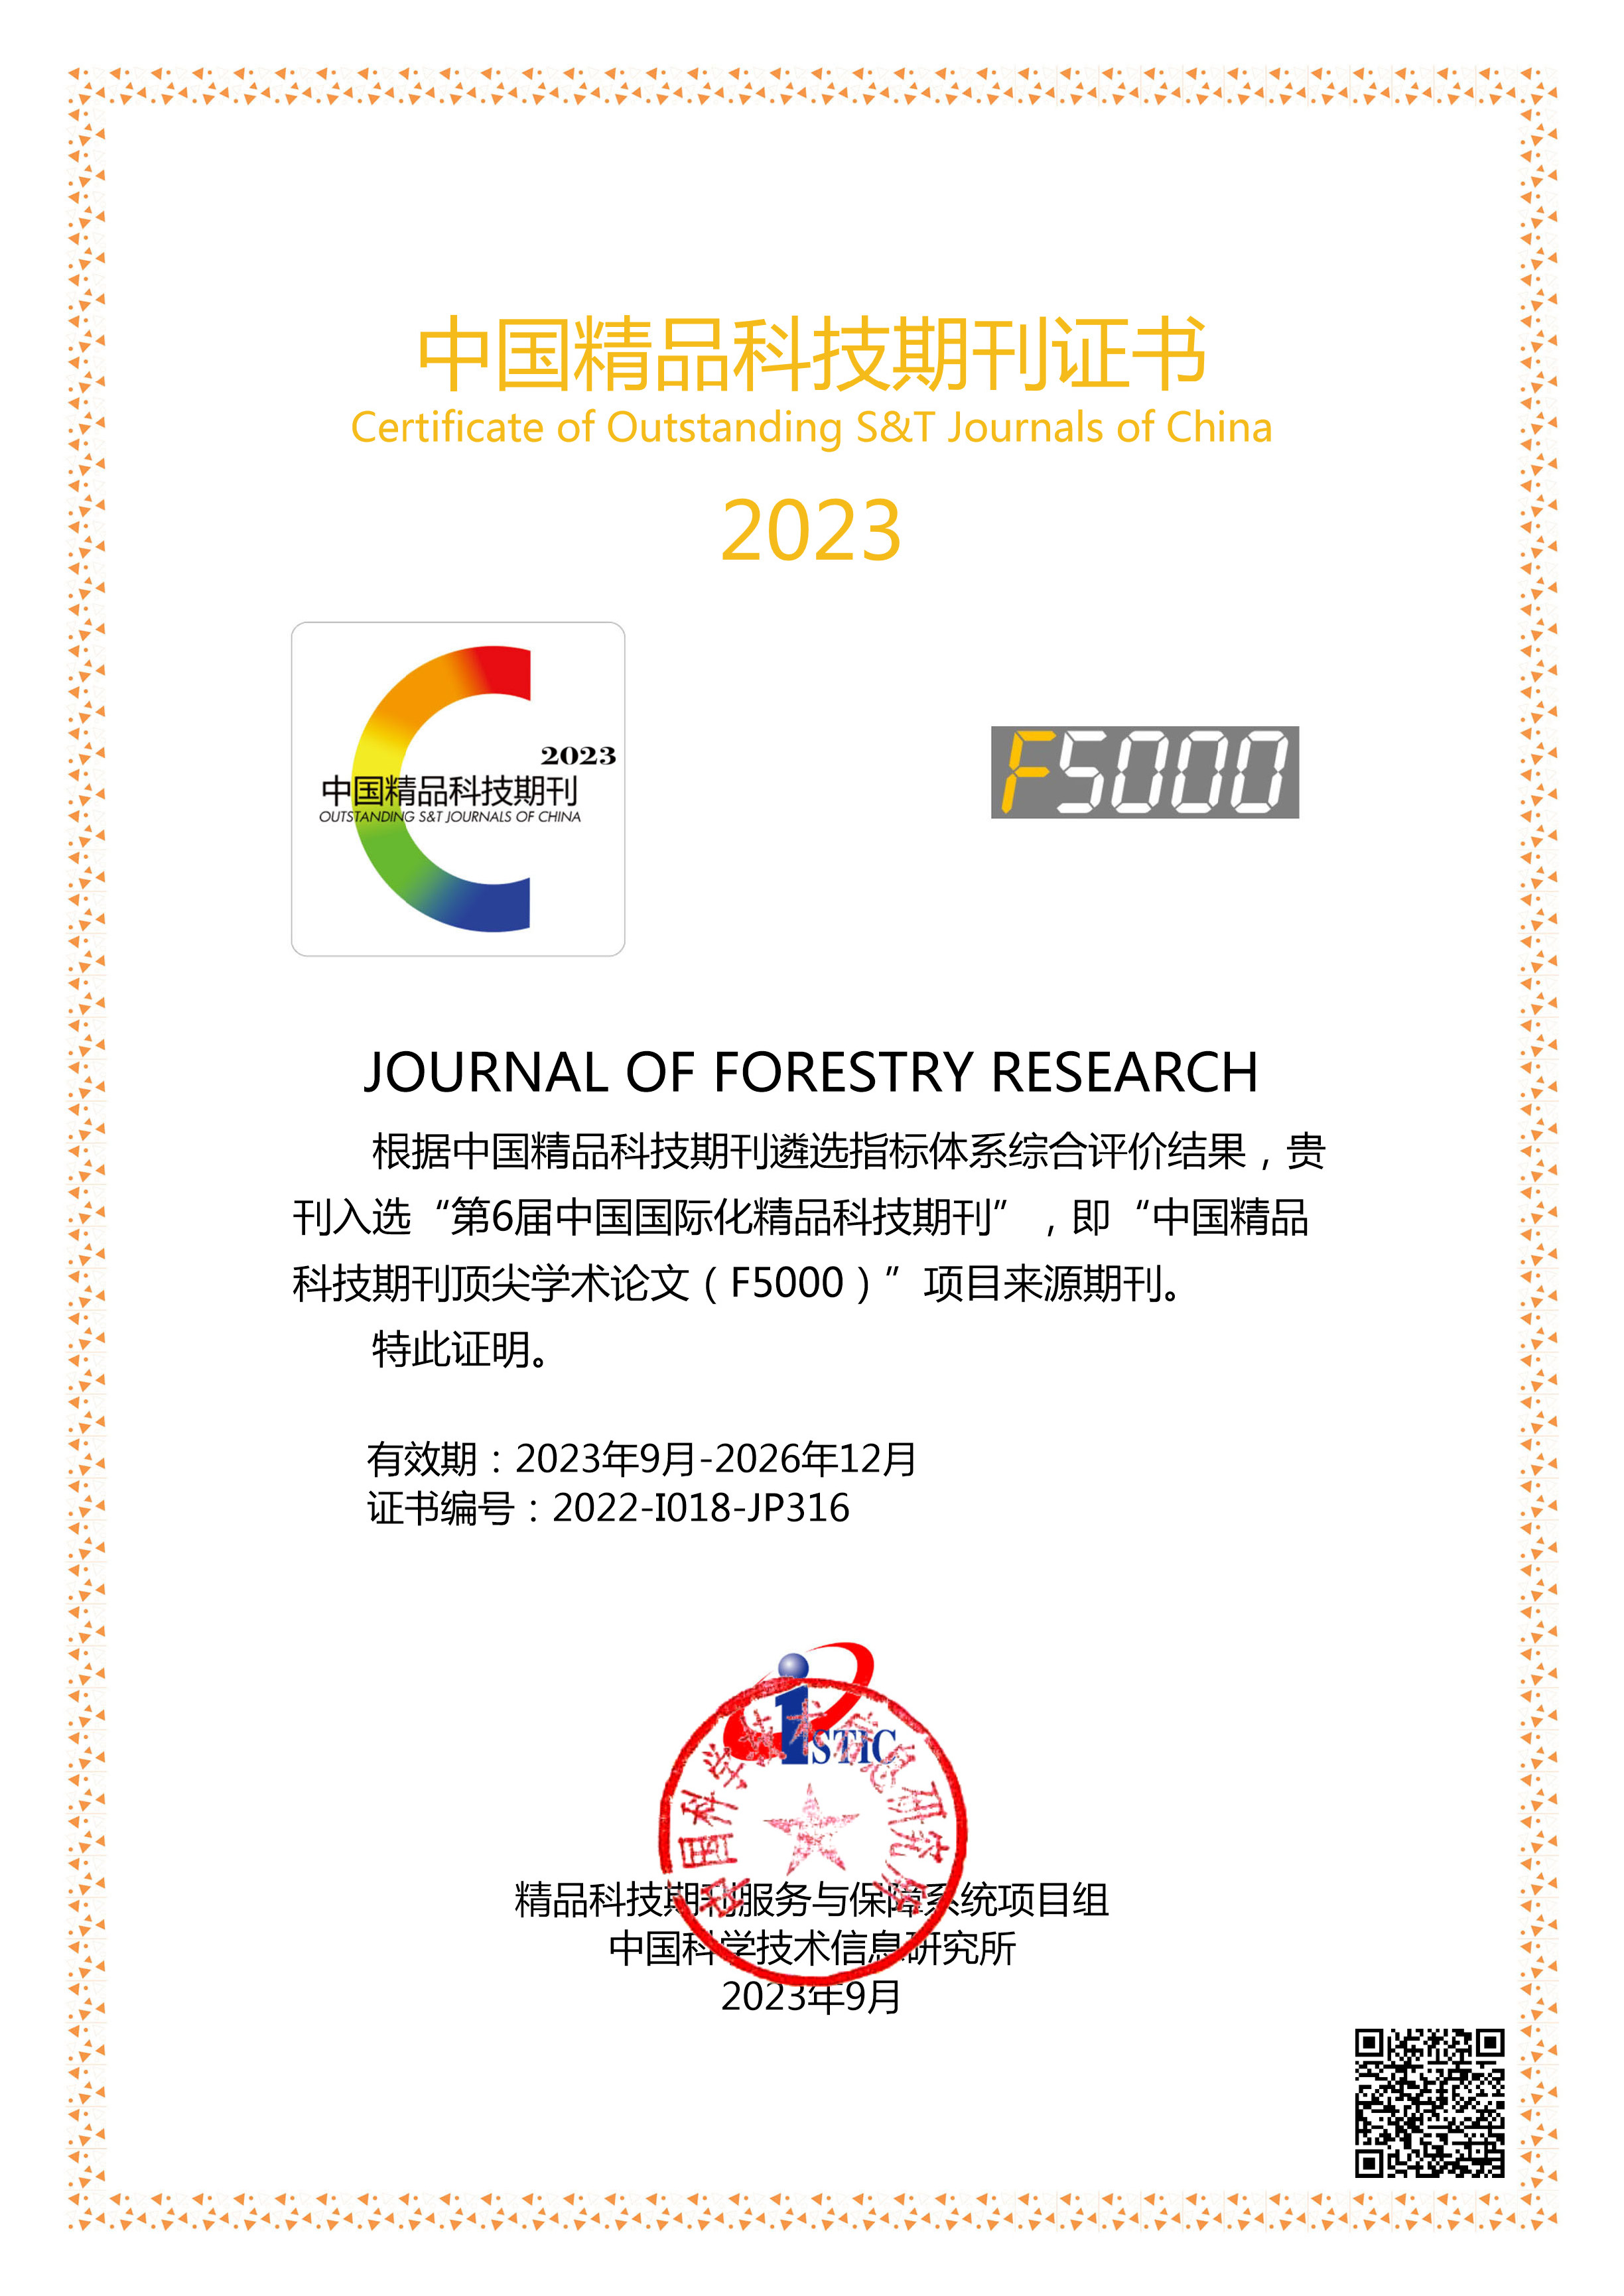 JOURNAL OF FORESTRY RESEARCH-ʻƷƼڿF5000.jpg